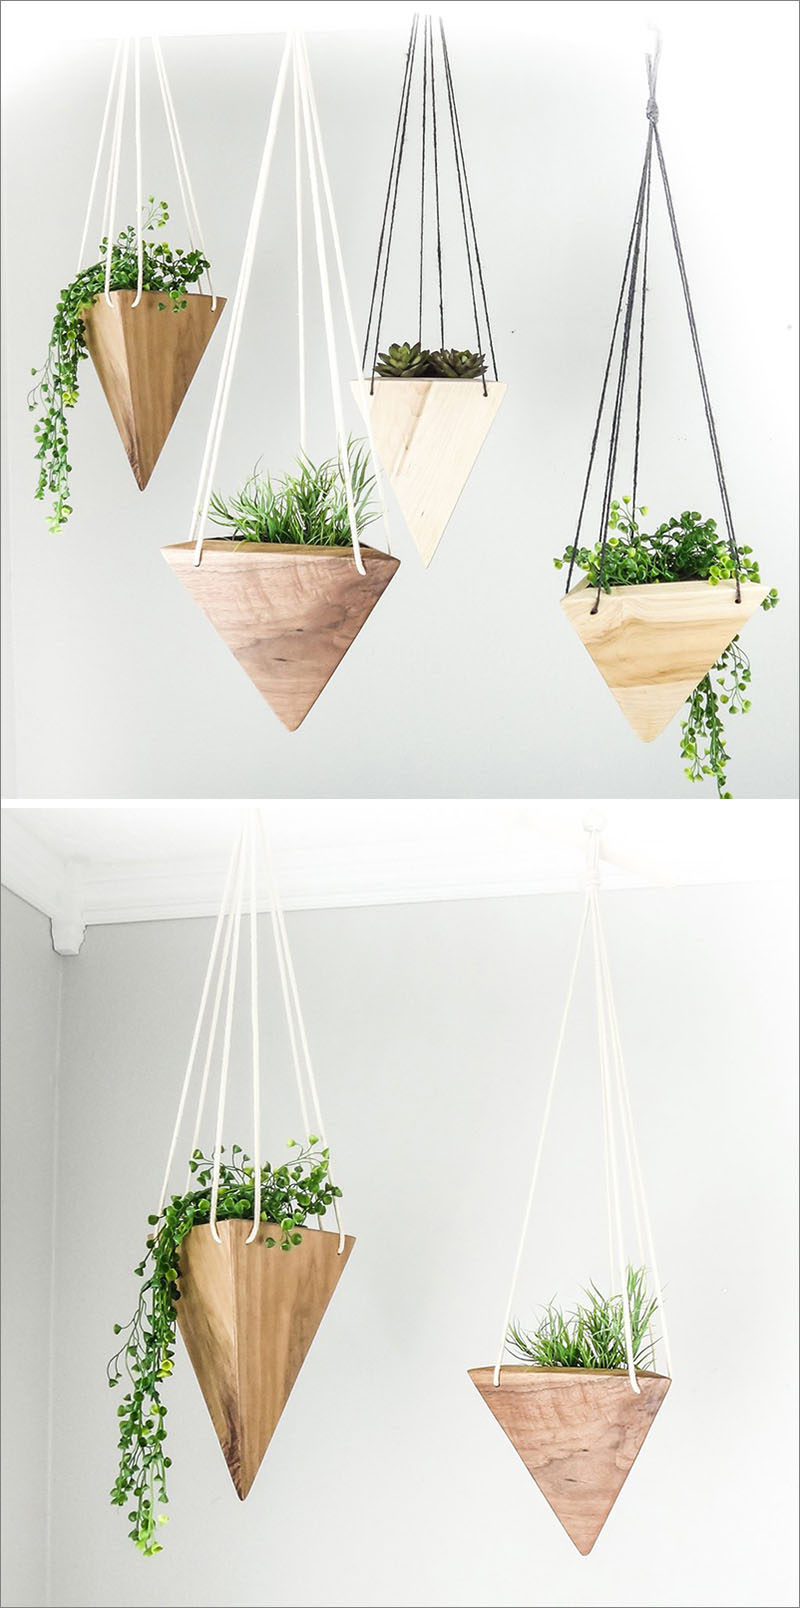 Fernweh Woodworking has created a collection of modern, geometric hanging wood planters, made from solid pieces of real wood.